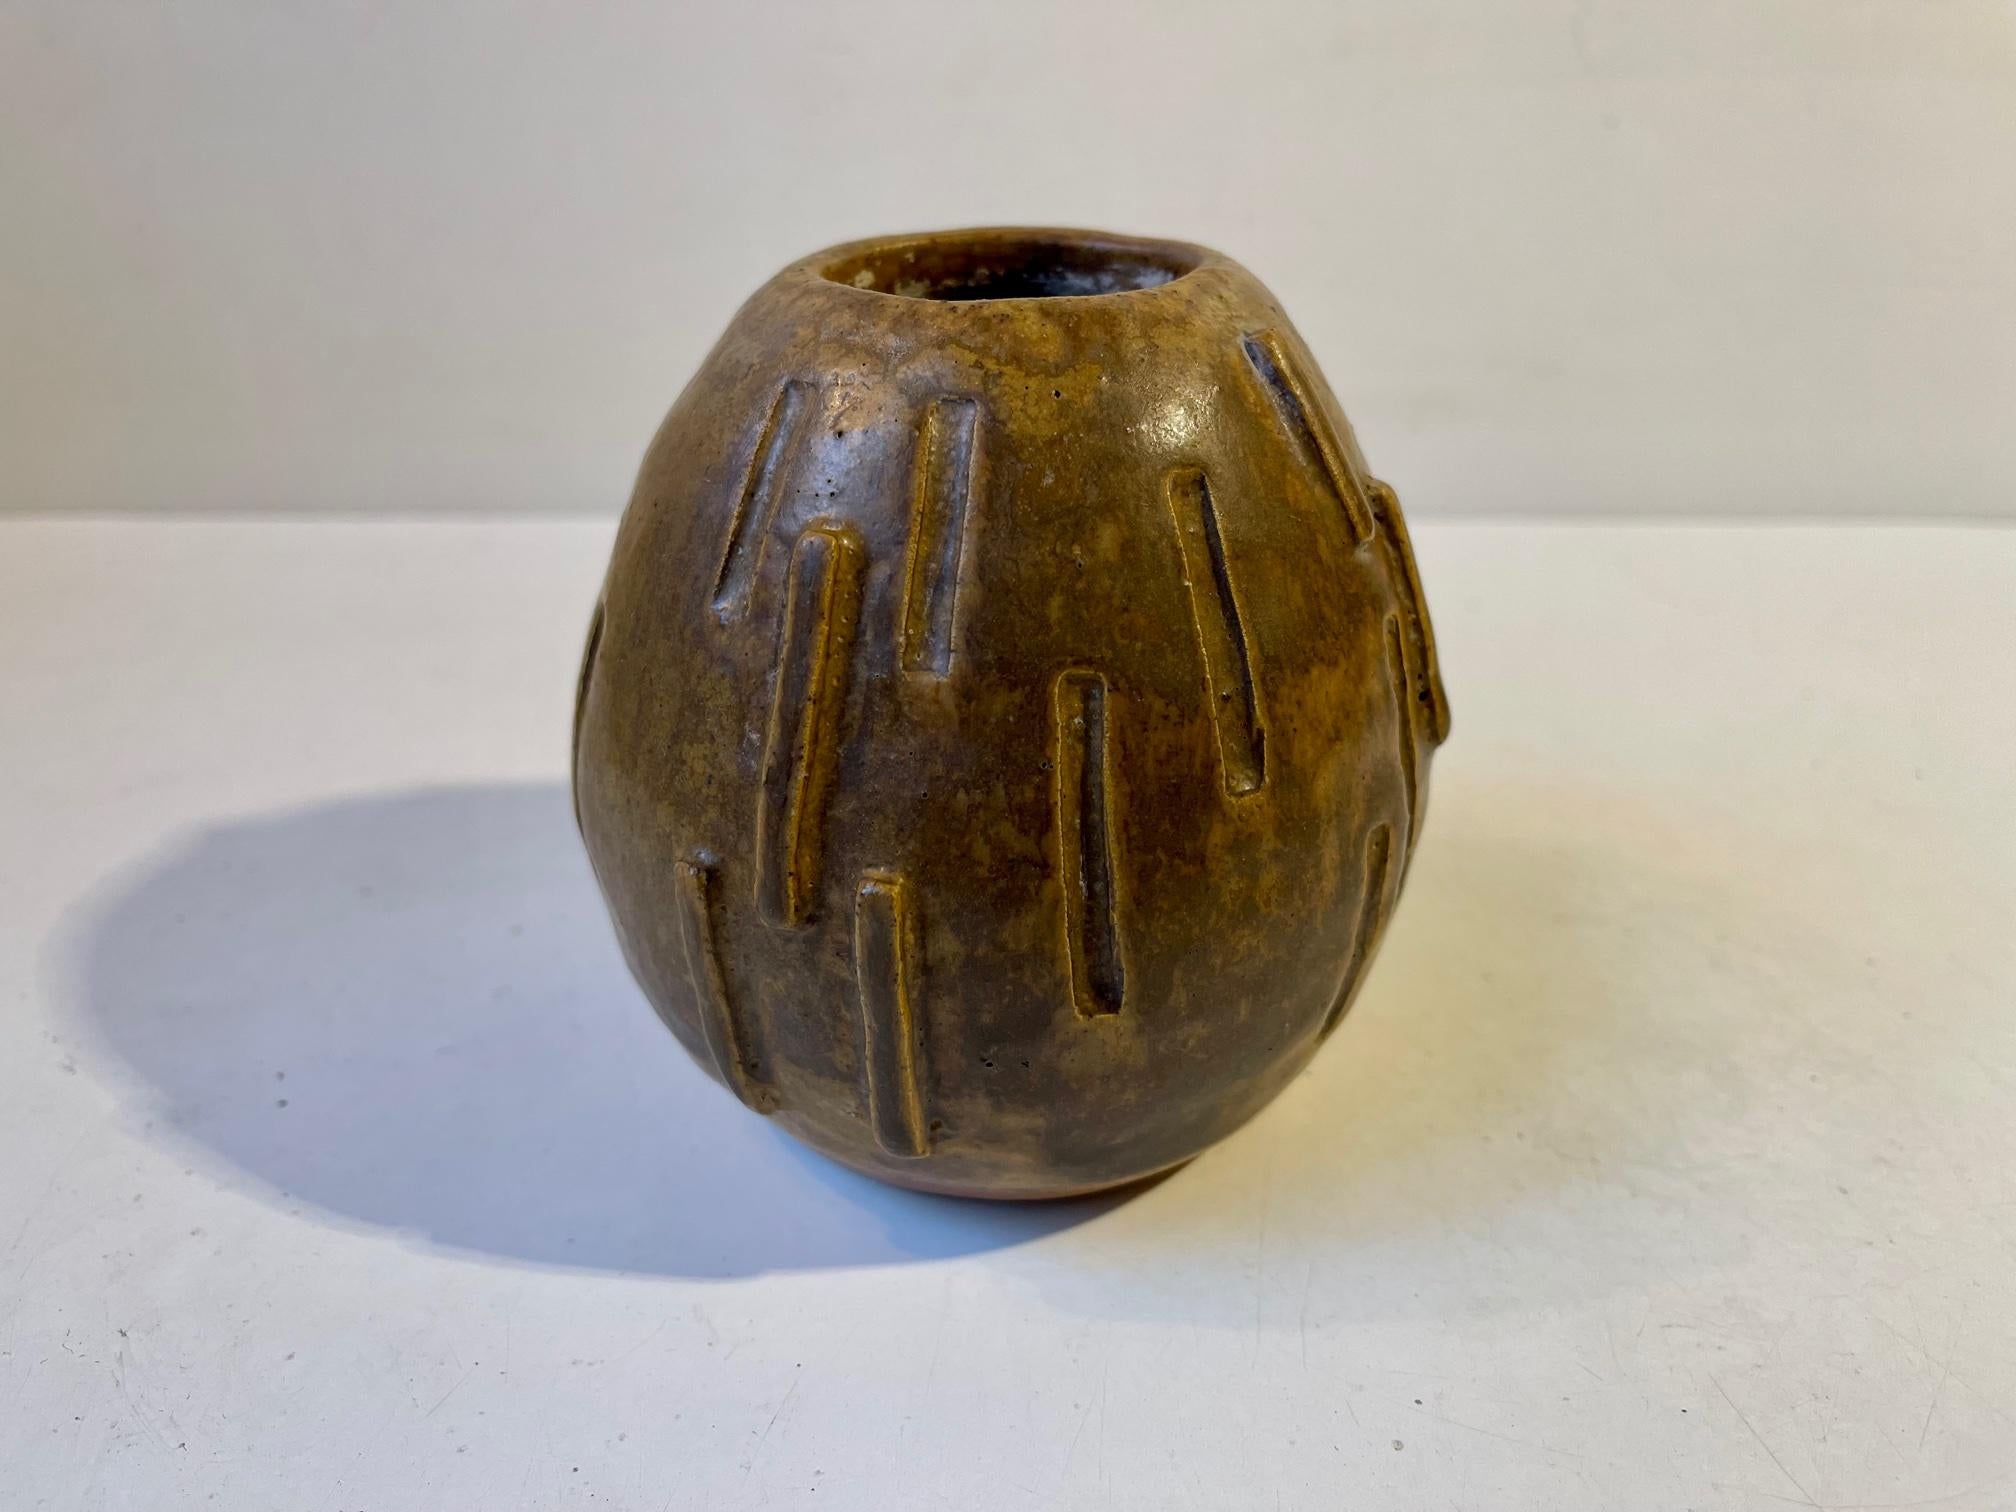 Piece unique studio art bullet shaped stoneware vase in brown hares fur glaze. Its by an unidentified Scandinavian Ceramist: EFK and is dated 1970. The style of this piece is brutalism with hints of constructivism and deconstructionism. Shown by the